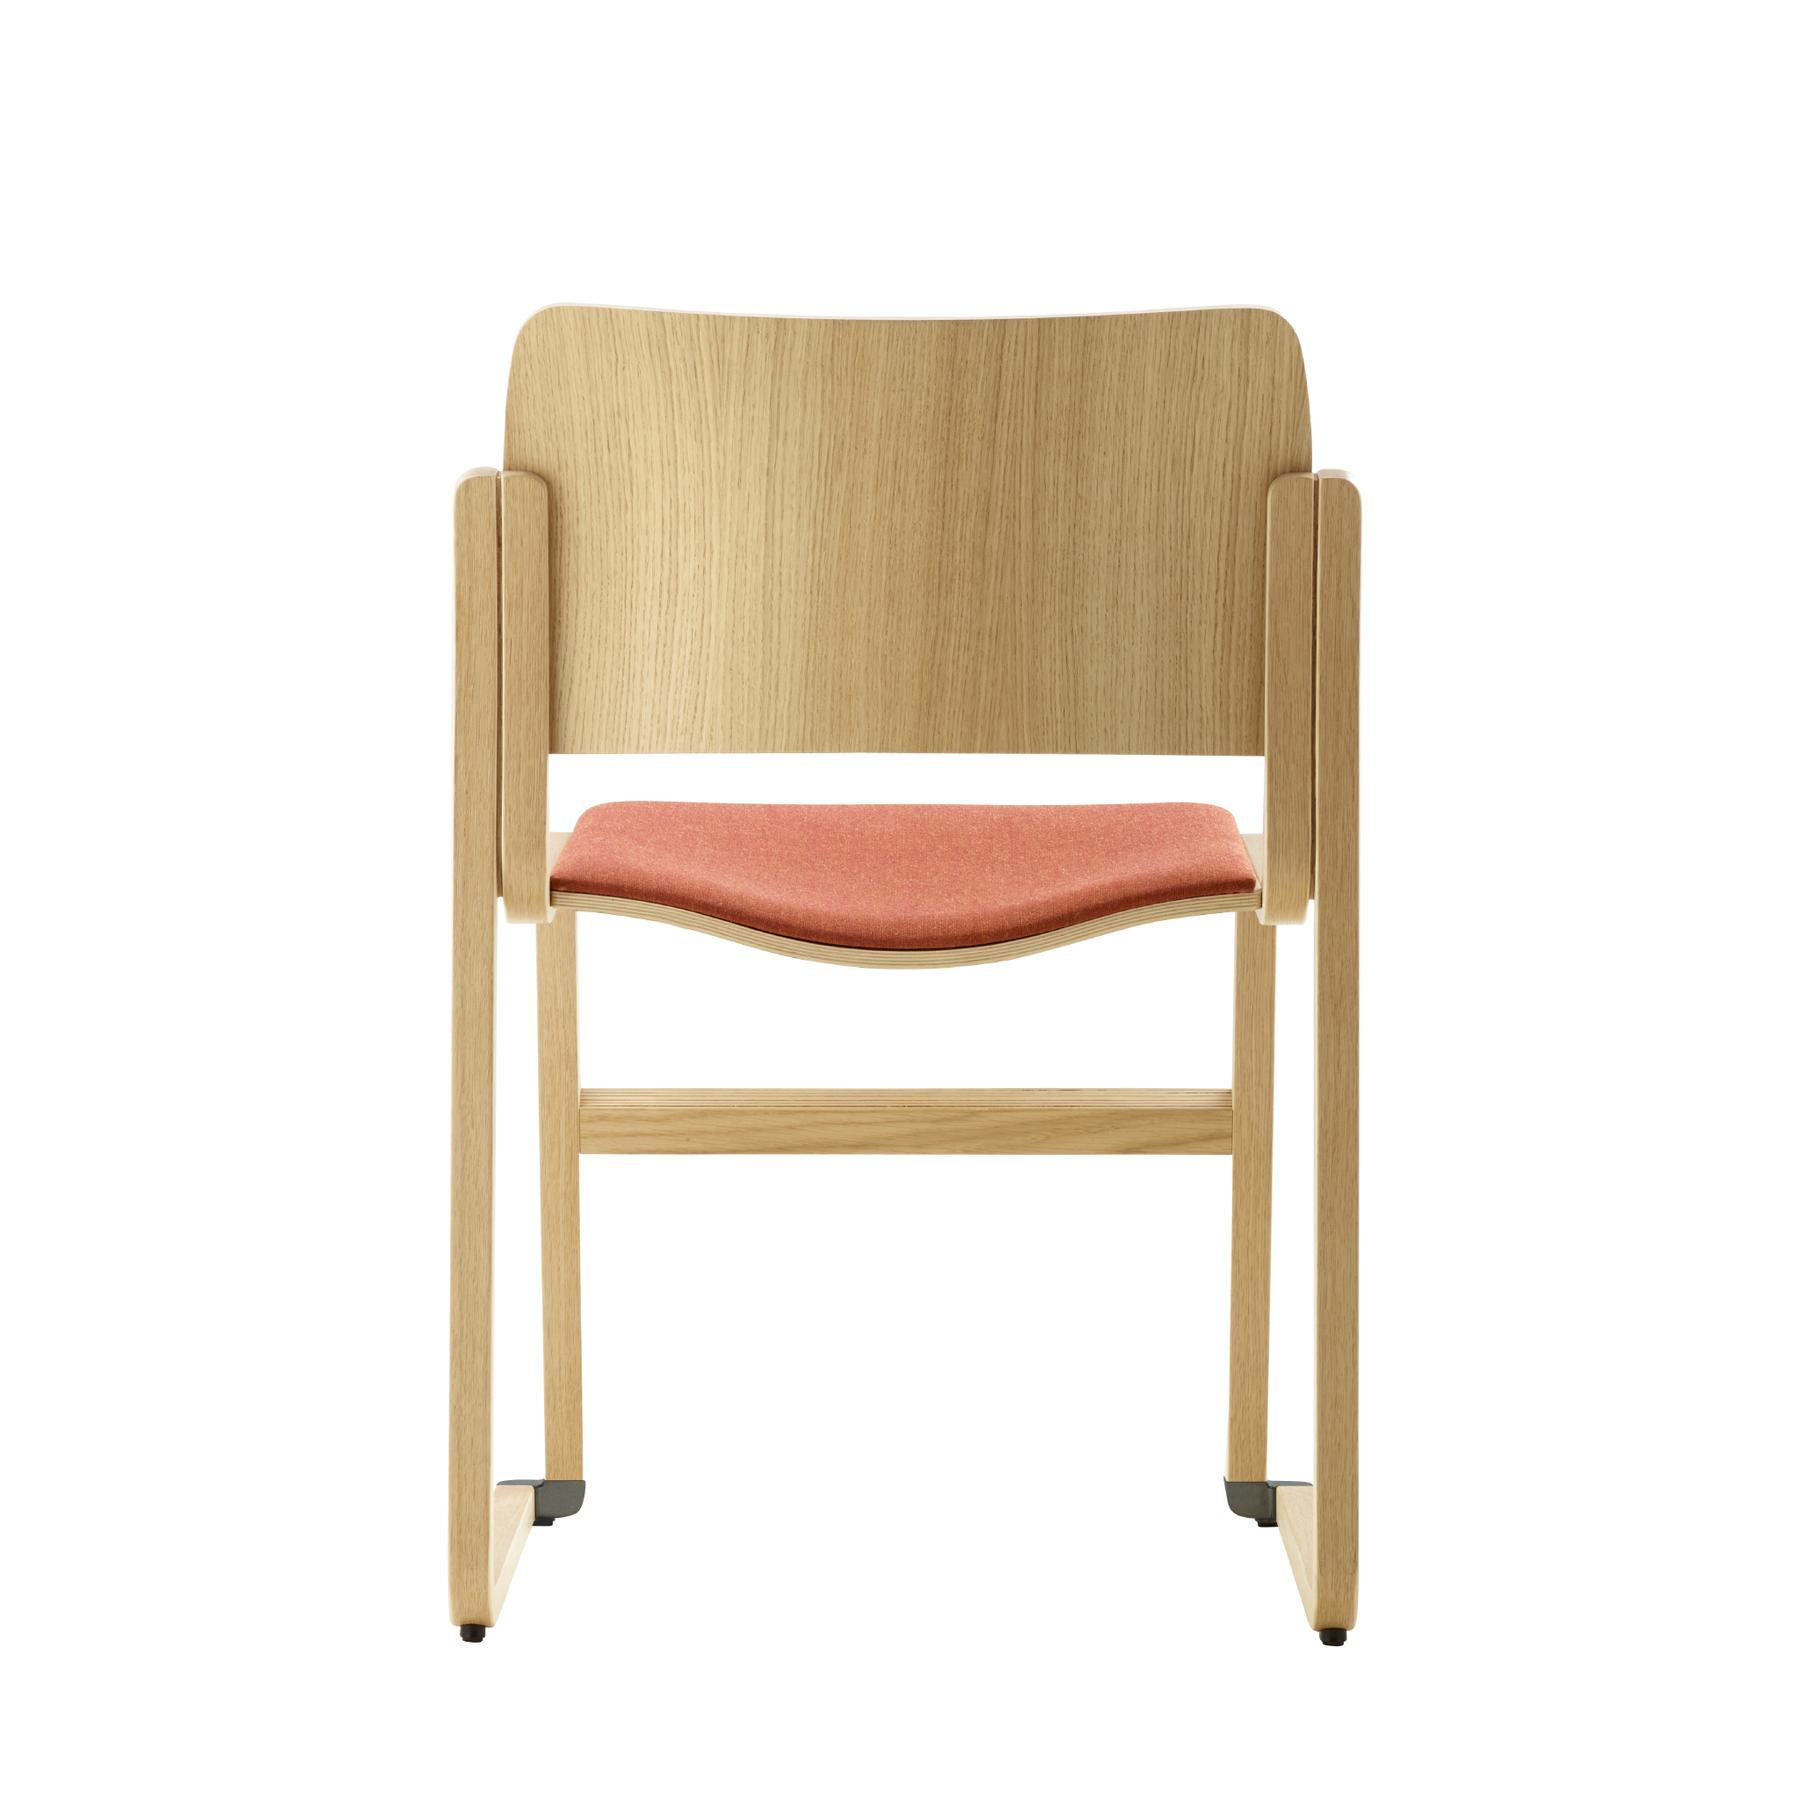 Howe 40/4 upholstered wood stacking chair back view